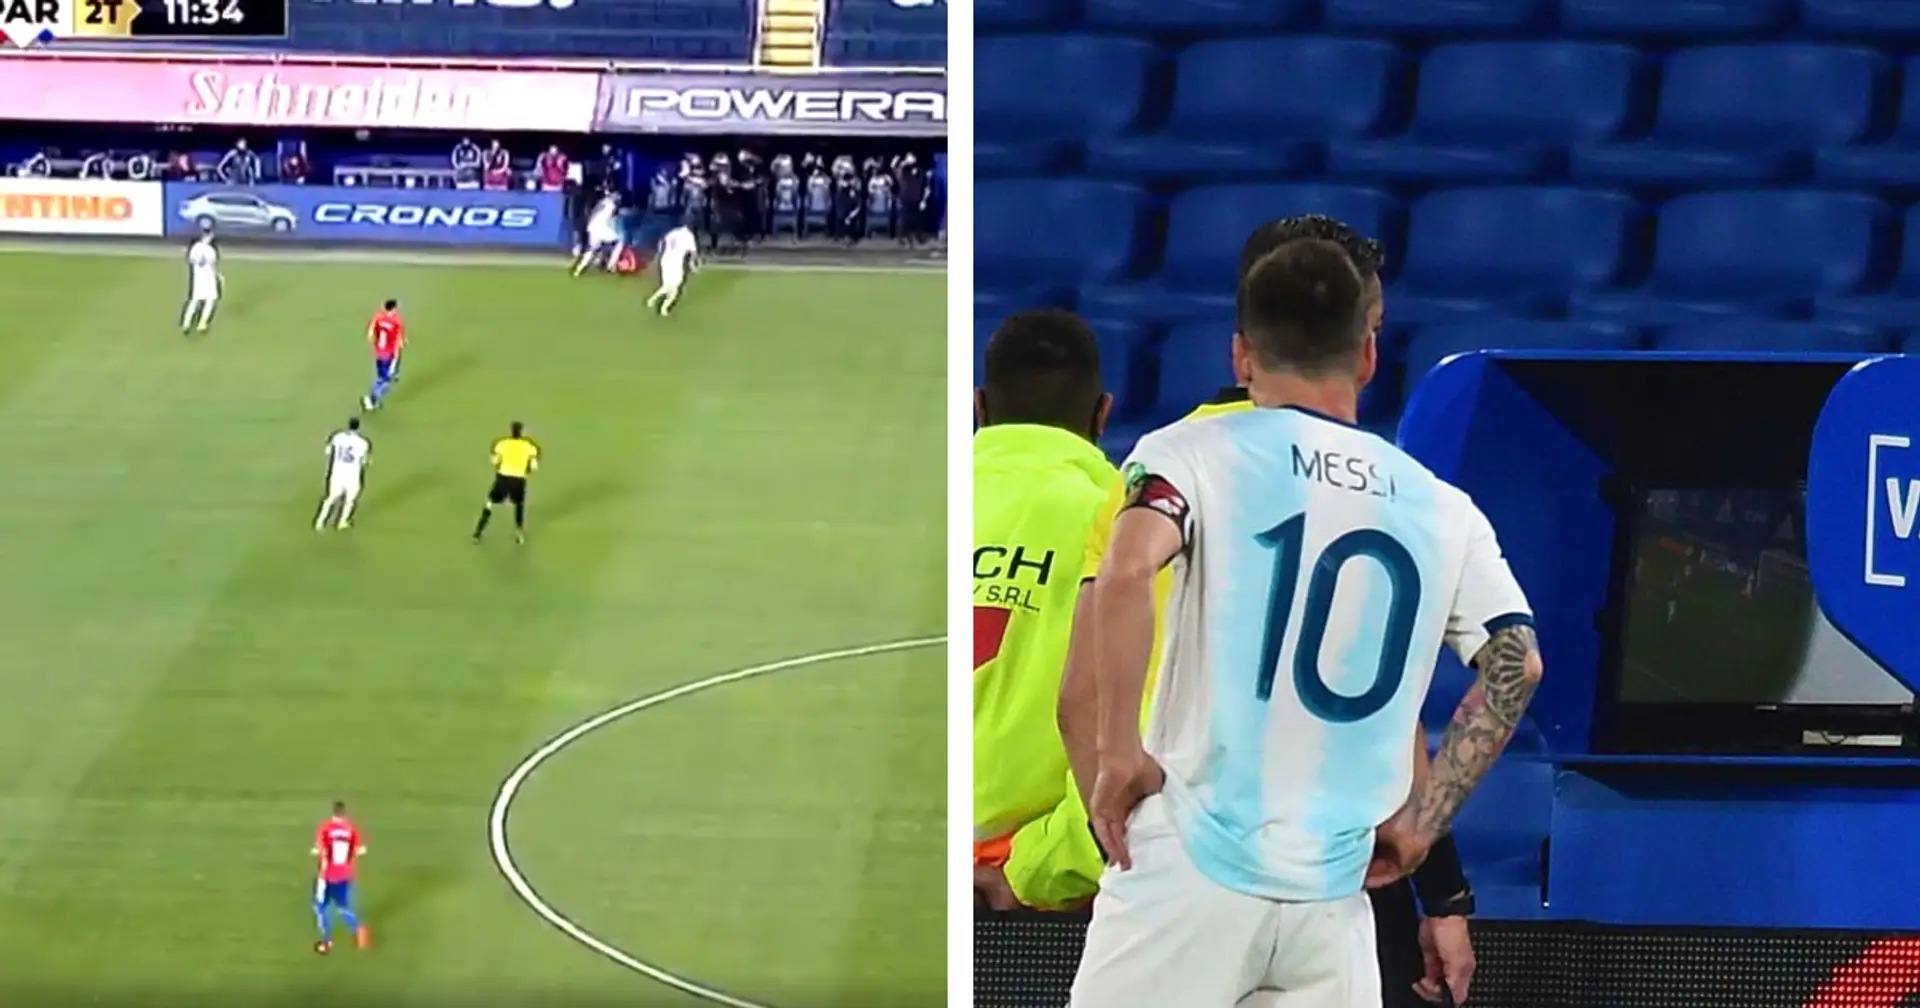 'VAR travelled back in time to find that foul': fans go mad as Messi's winner for Argentina denied due to foul 30 secs earlier